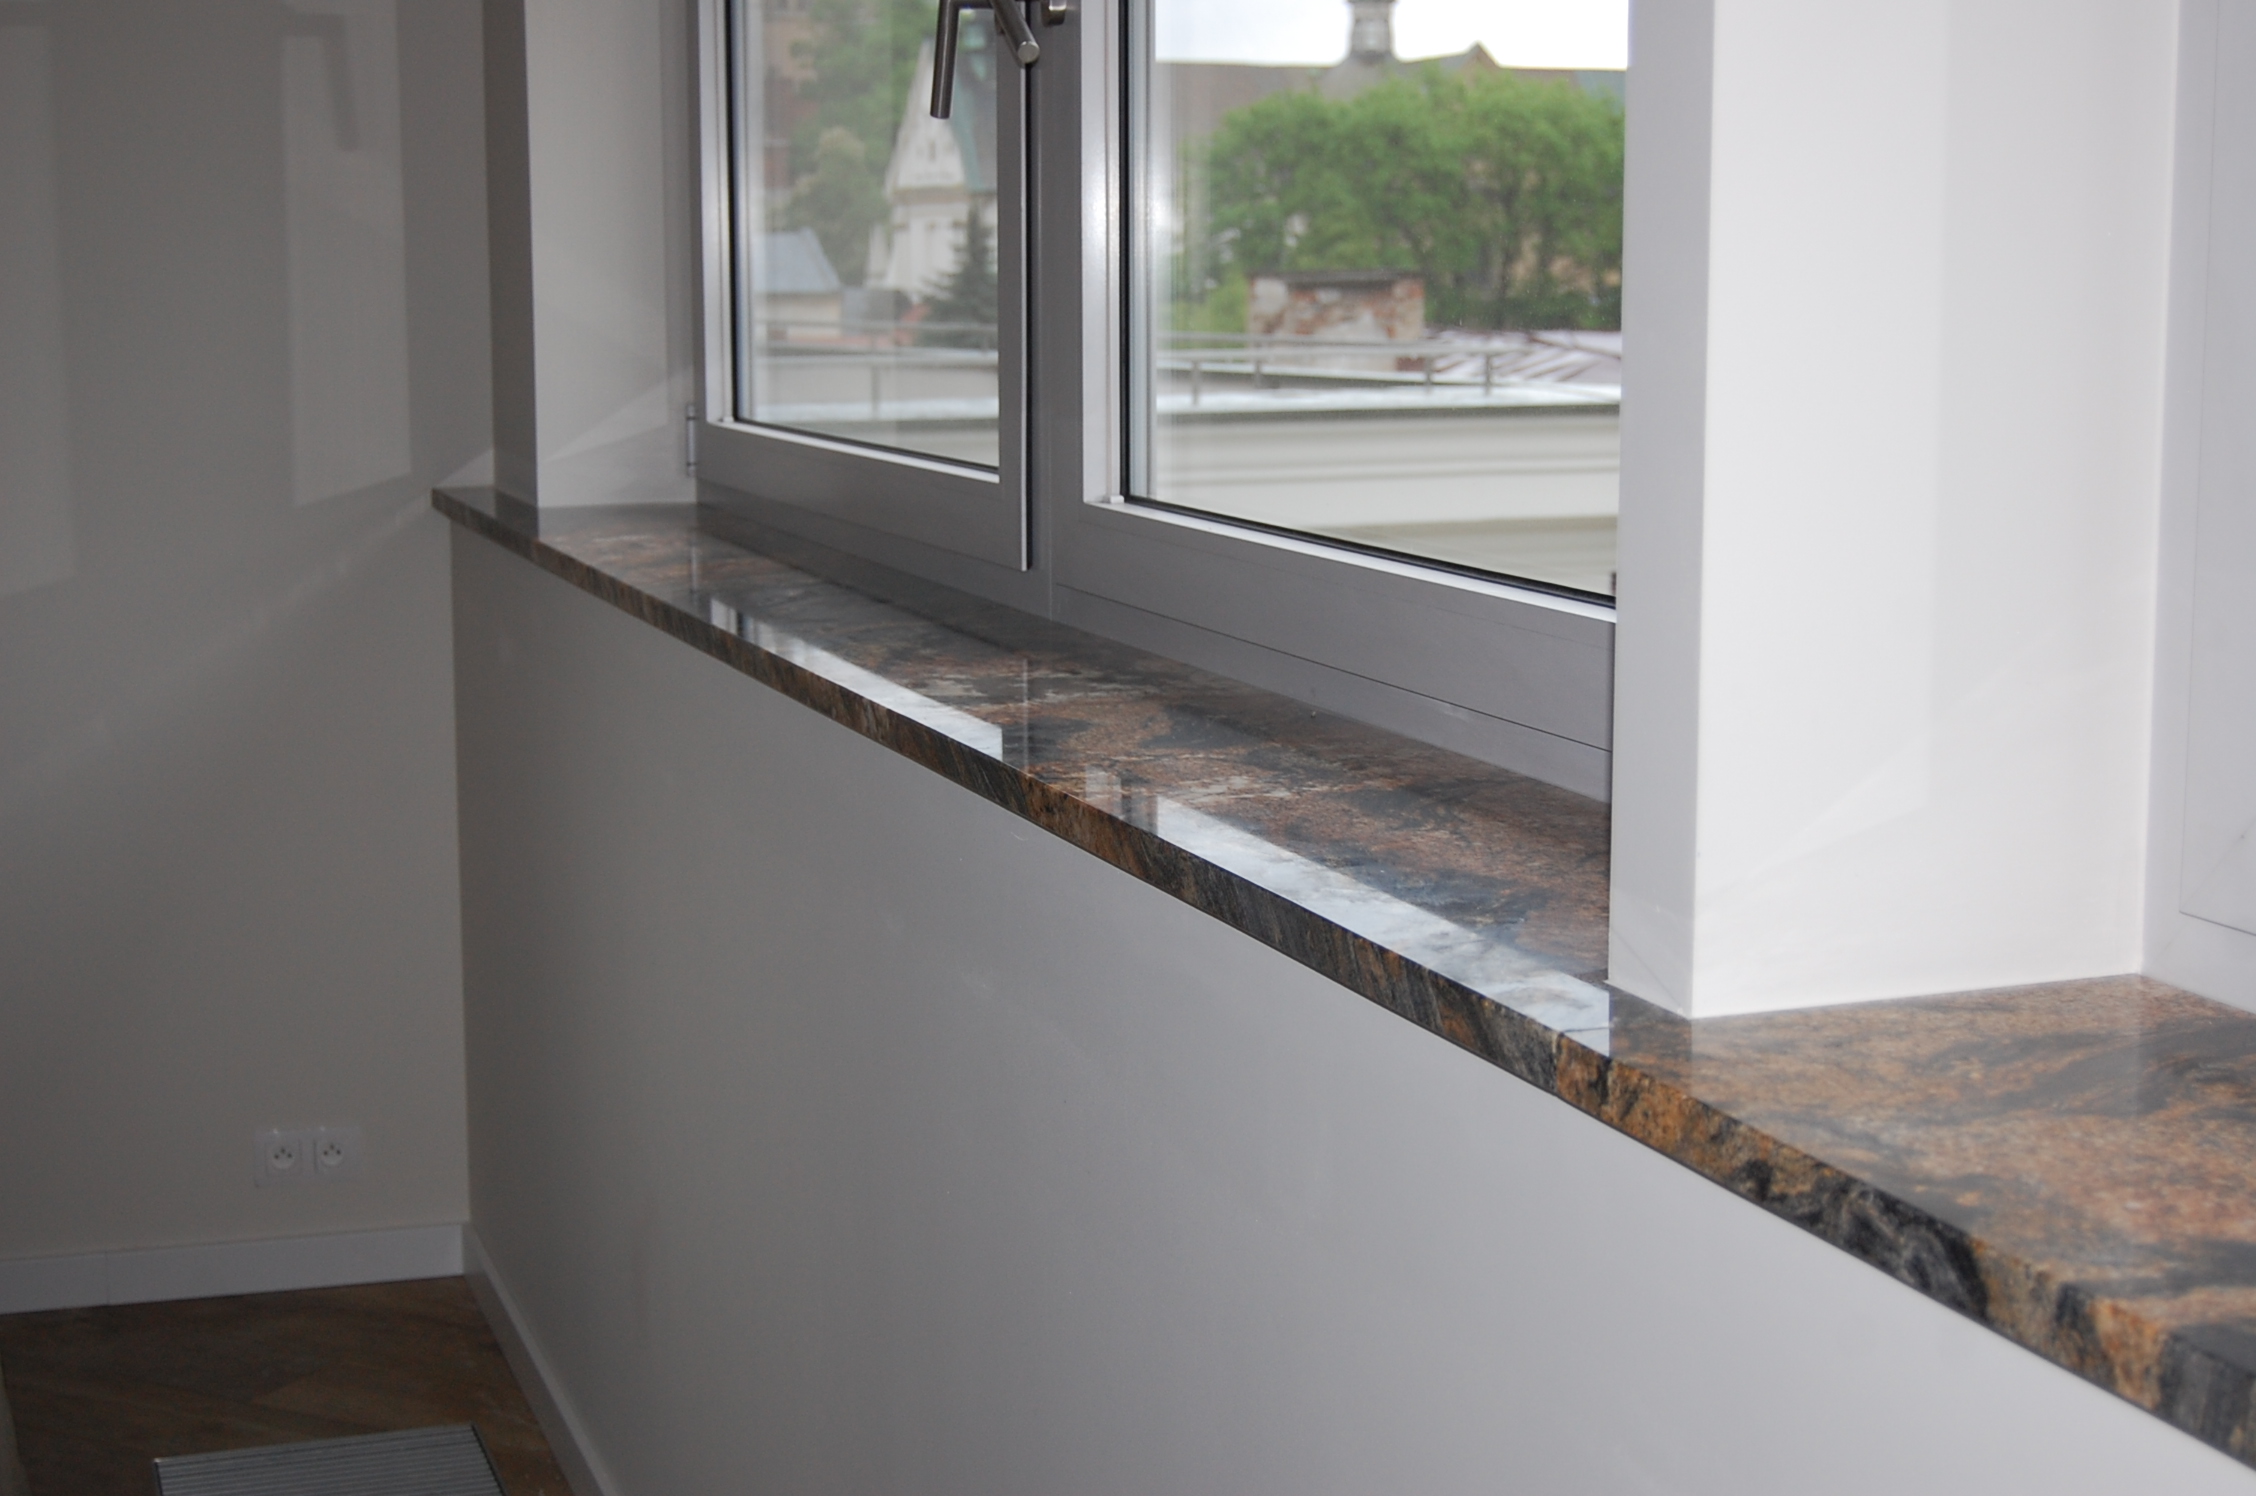 How to install a conglomerate window sill?